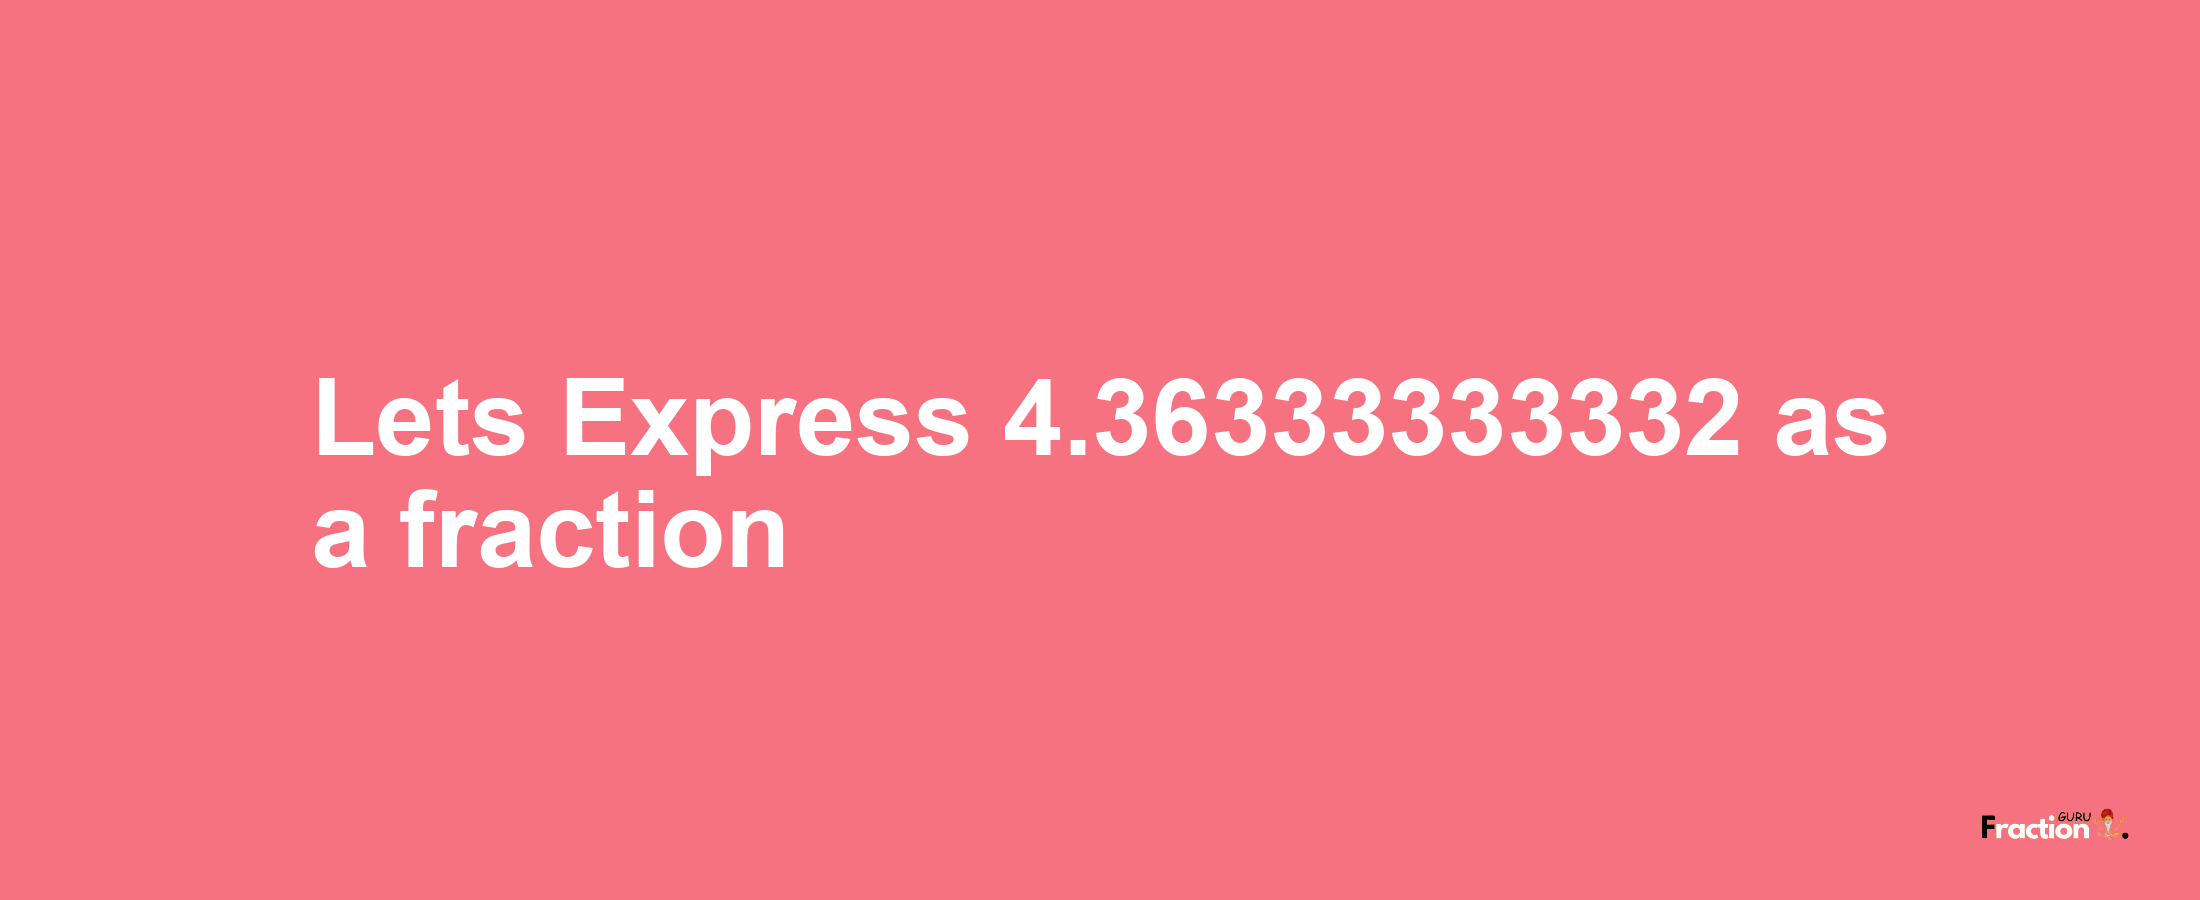 Lets Express 4.36333333332 as afraction